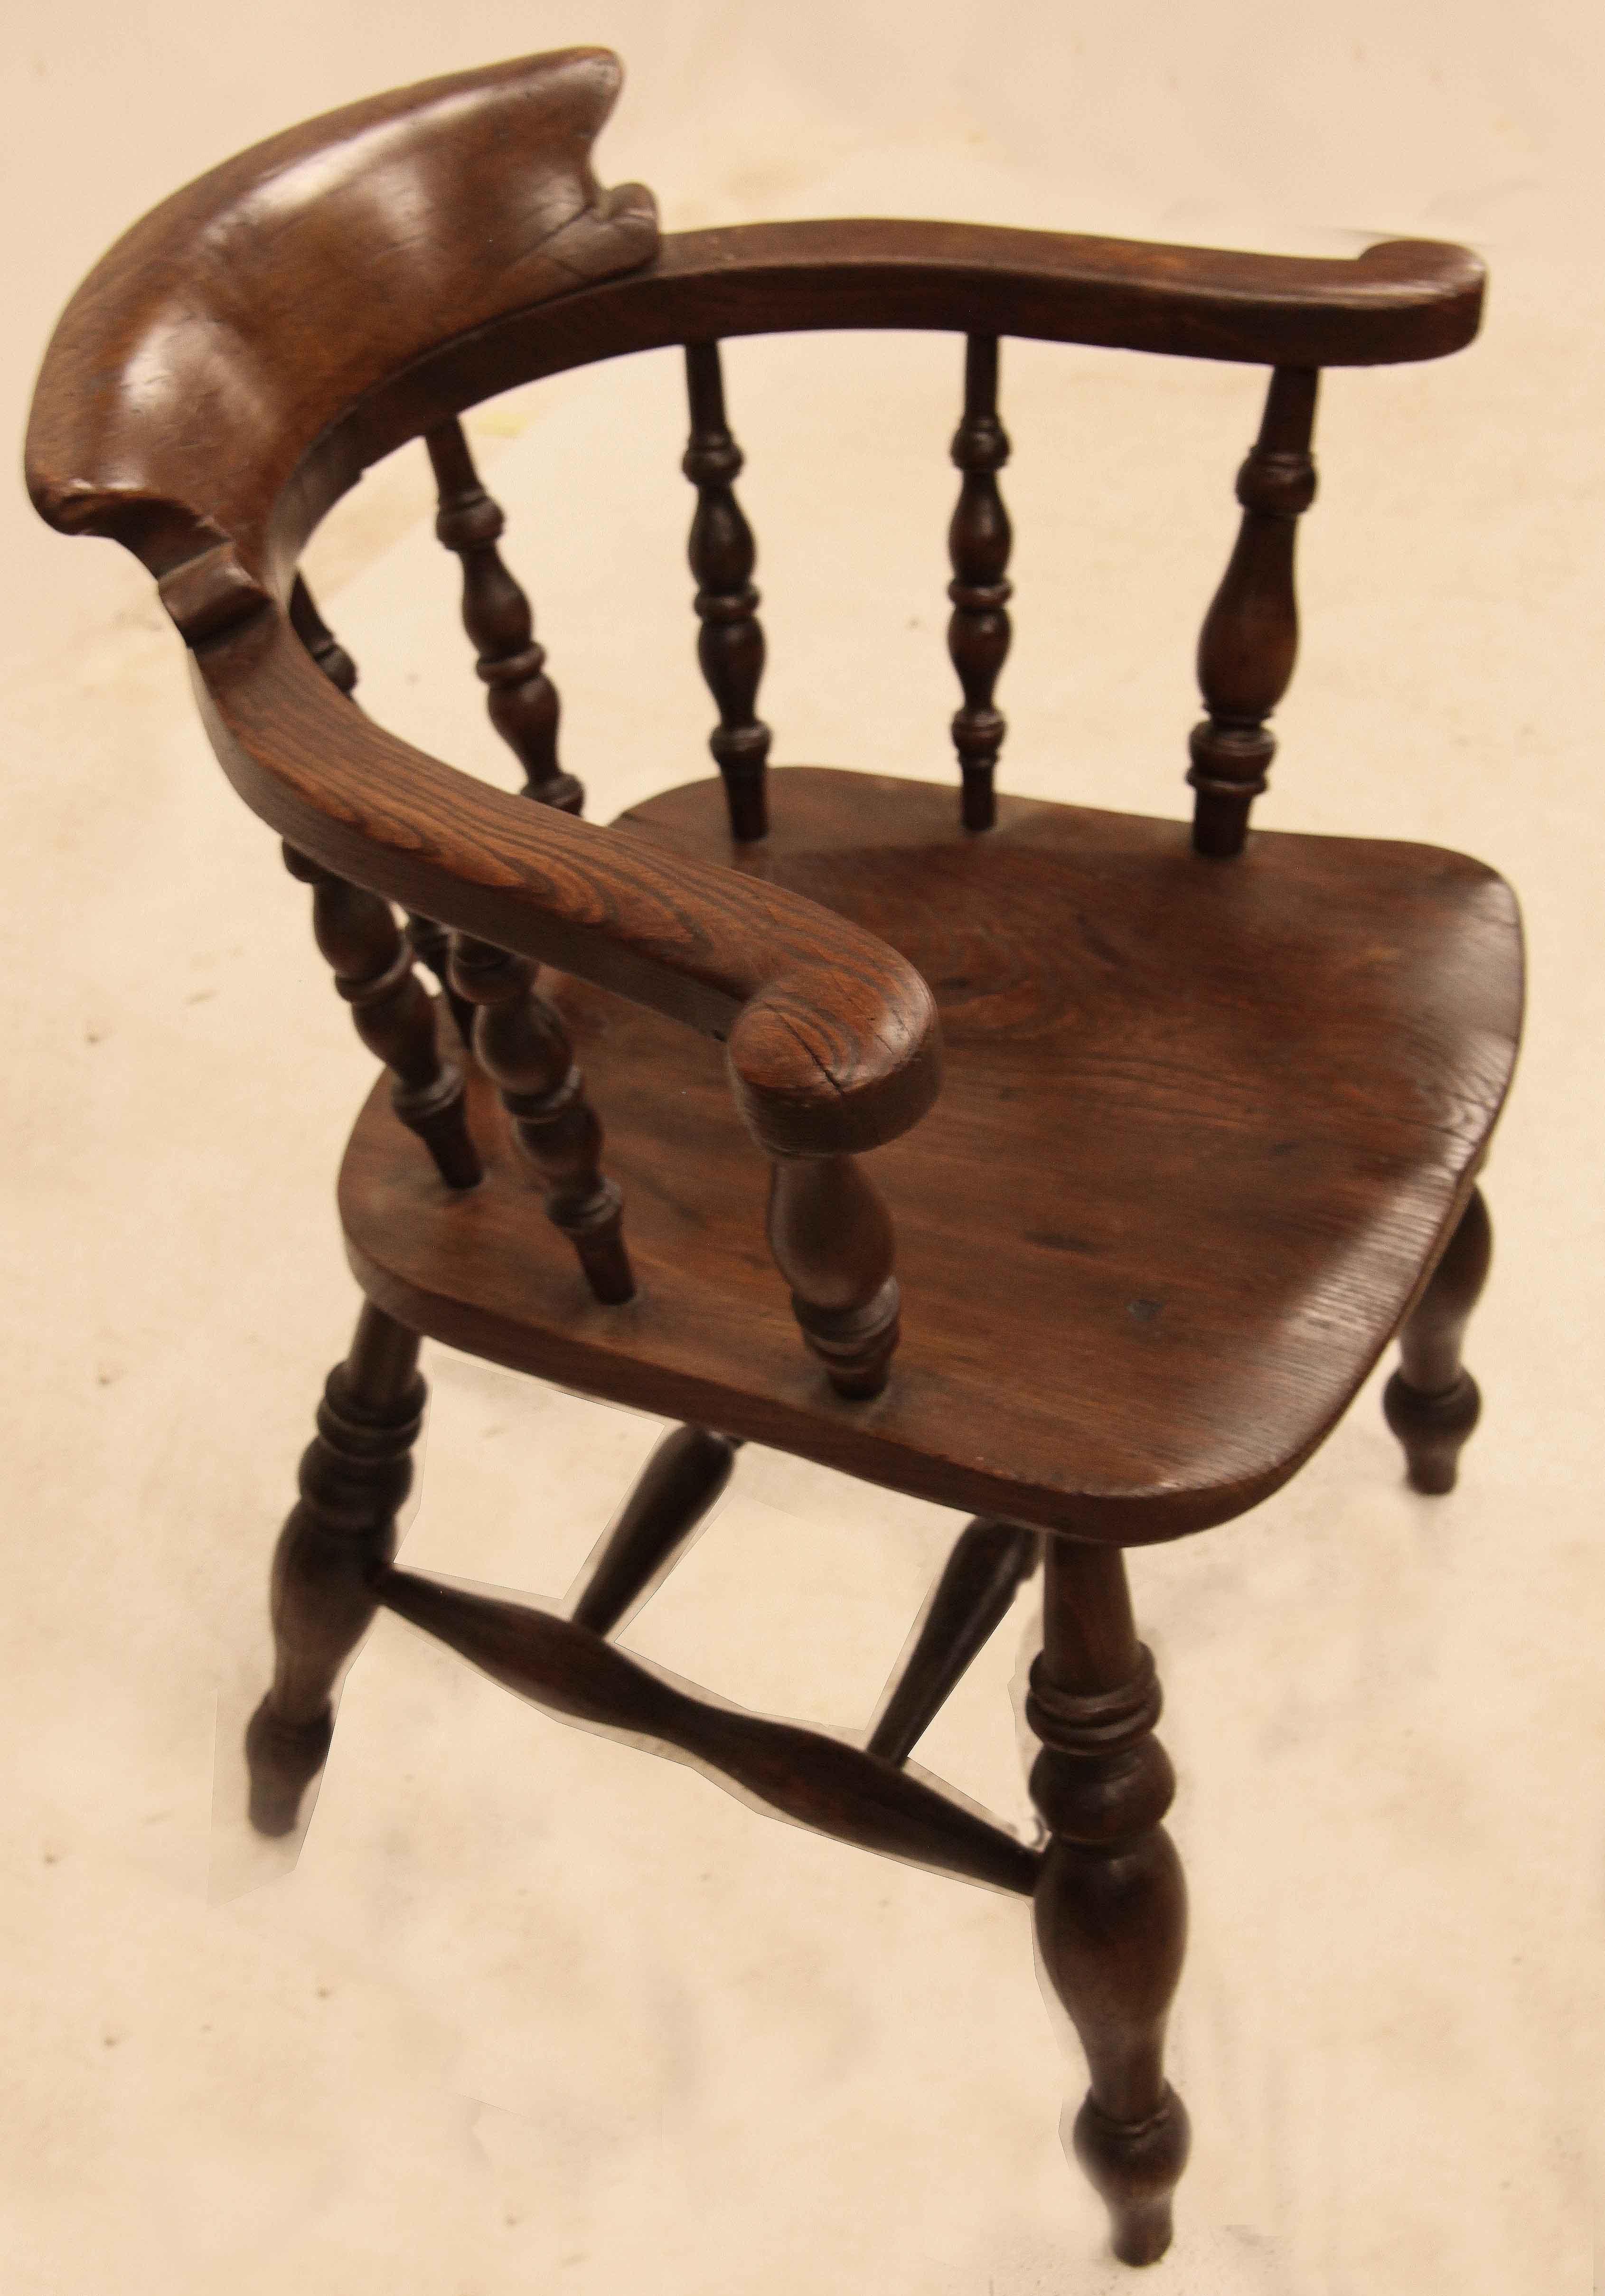 English elm captain's Windsor with warm color and patina, multiple spindles connect the arms to the shaped seat, legs with front to back stretchers and two cross stretchers for added stability.  Captain's Windsors are usually very comfortable and